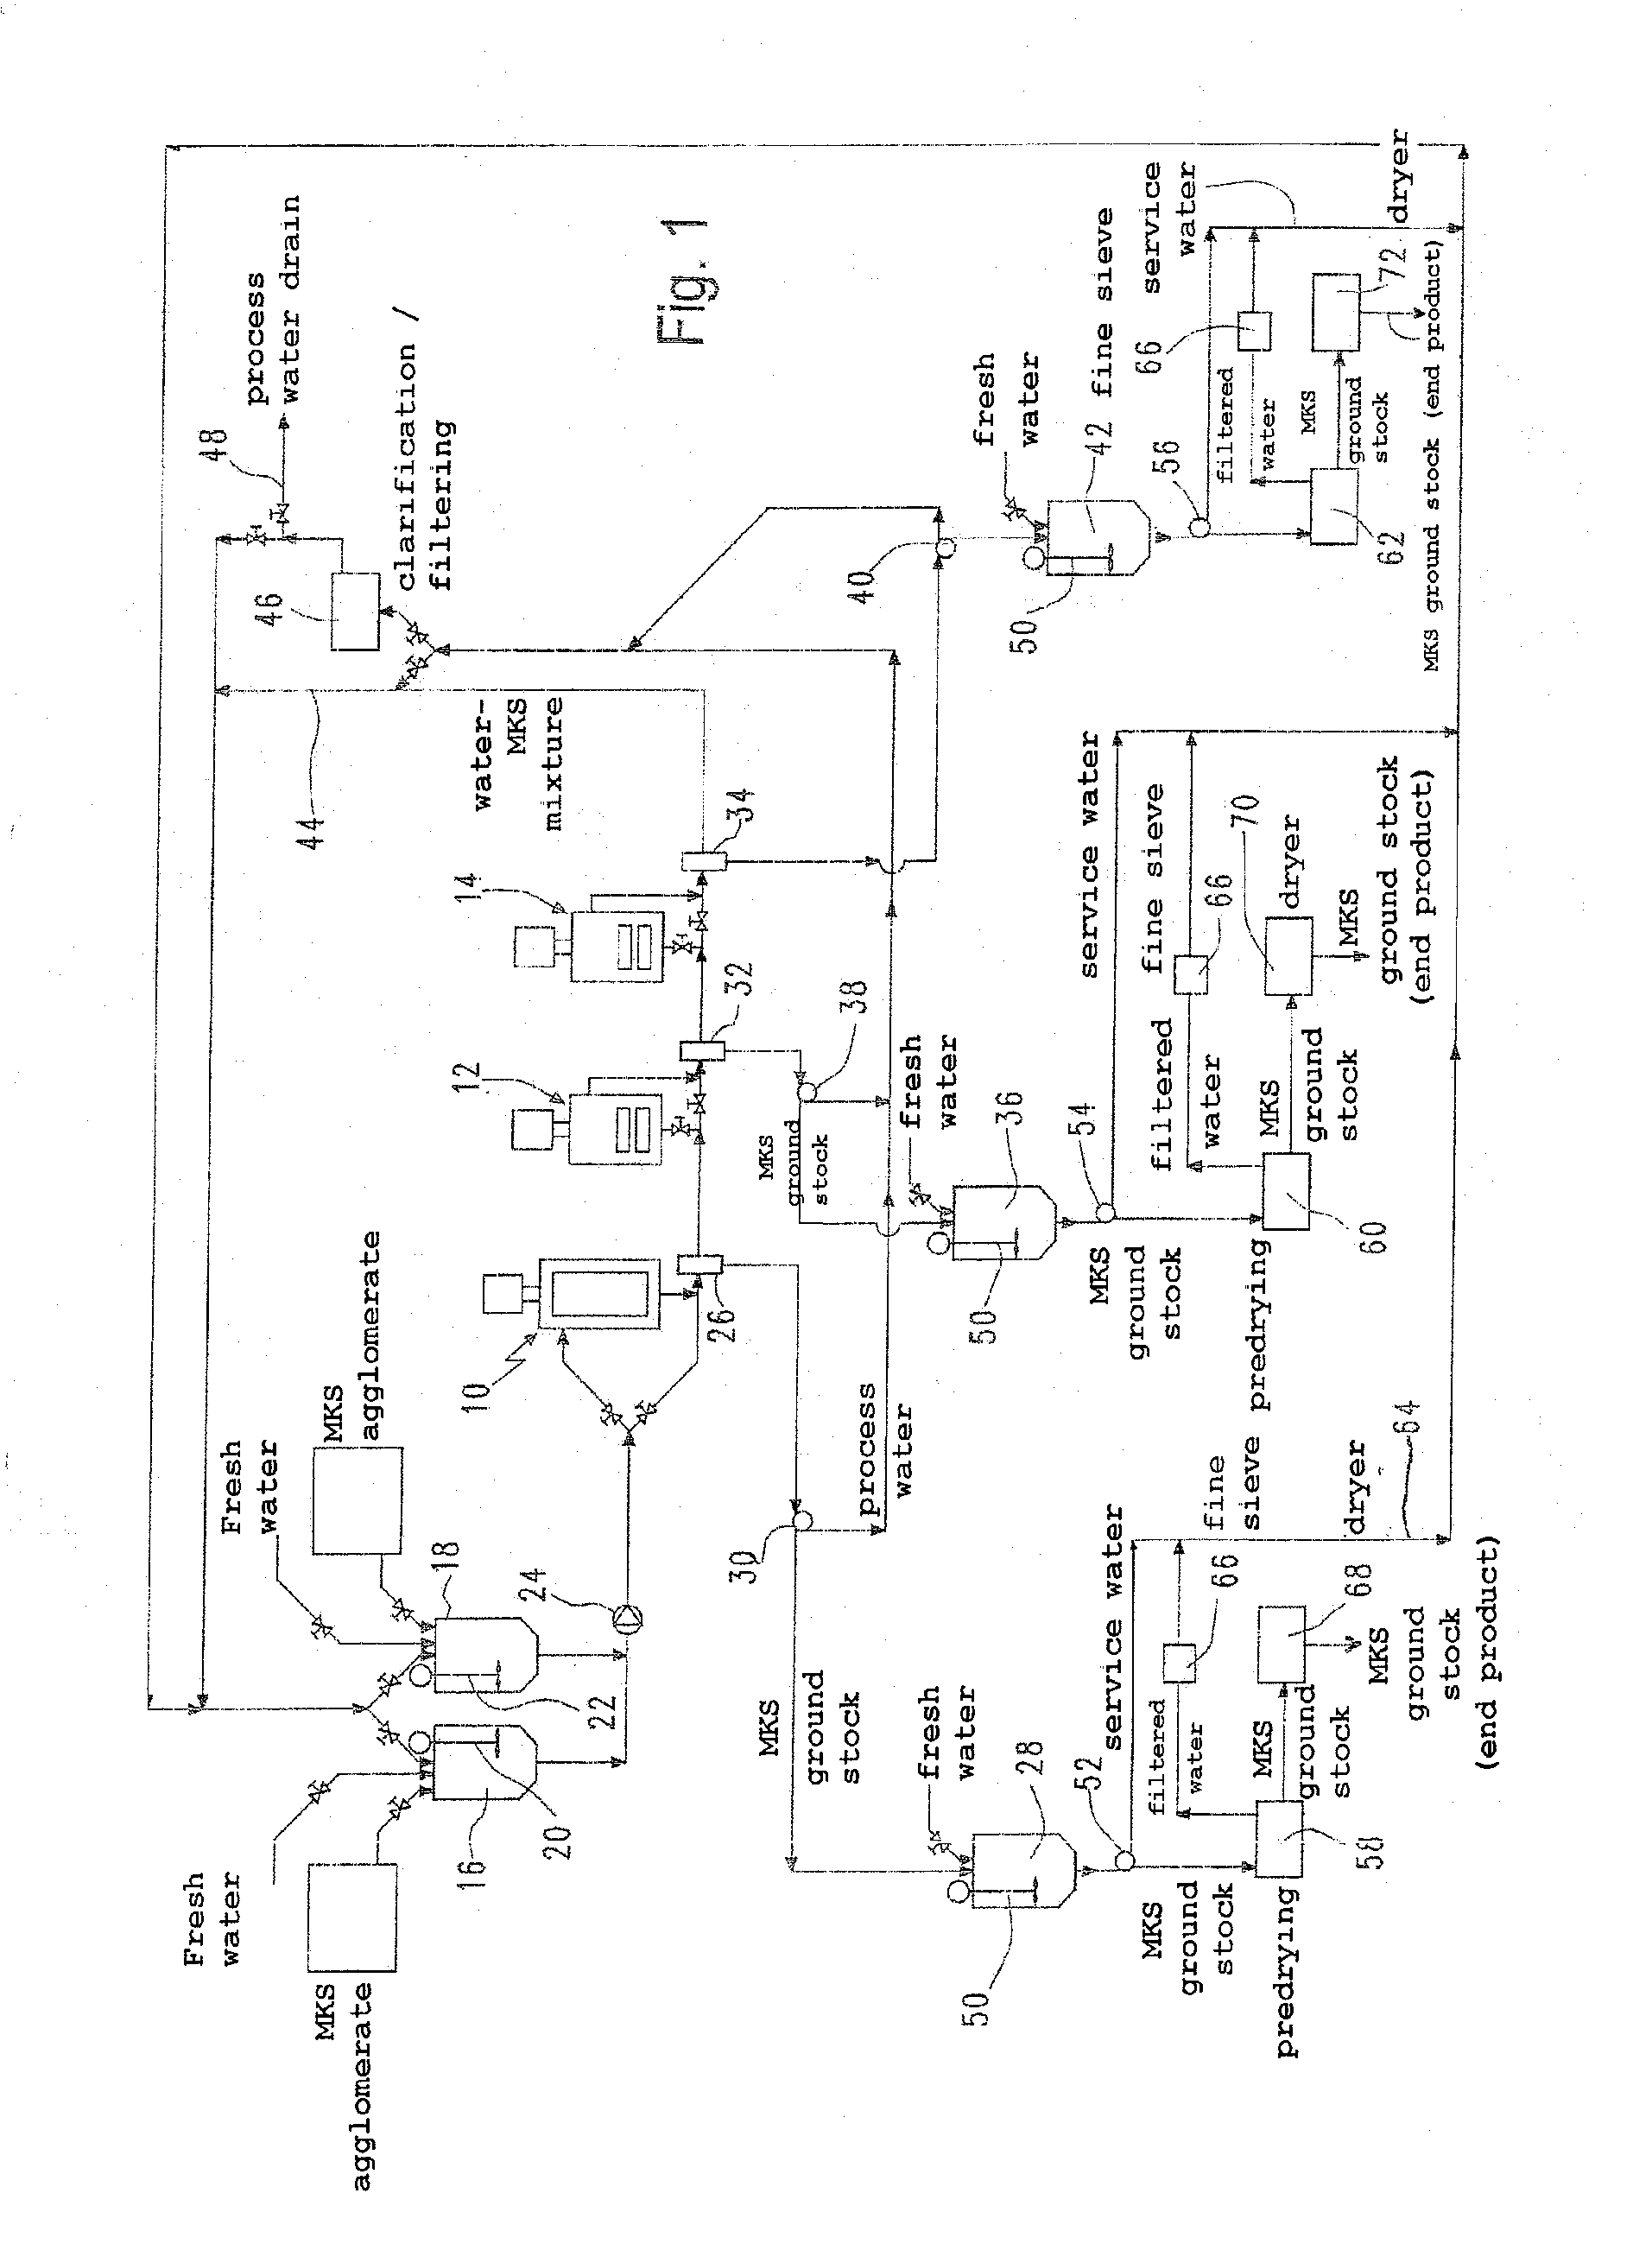 Method and Apparatus for Comminuting and Cleaning of Waste Plastic